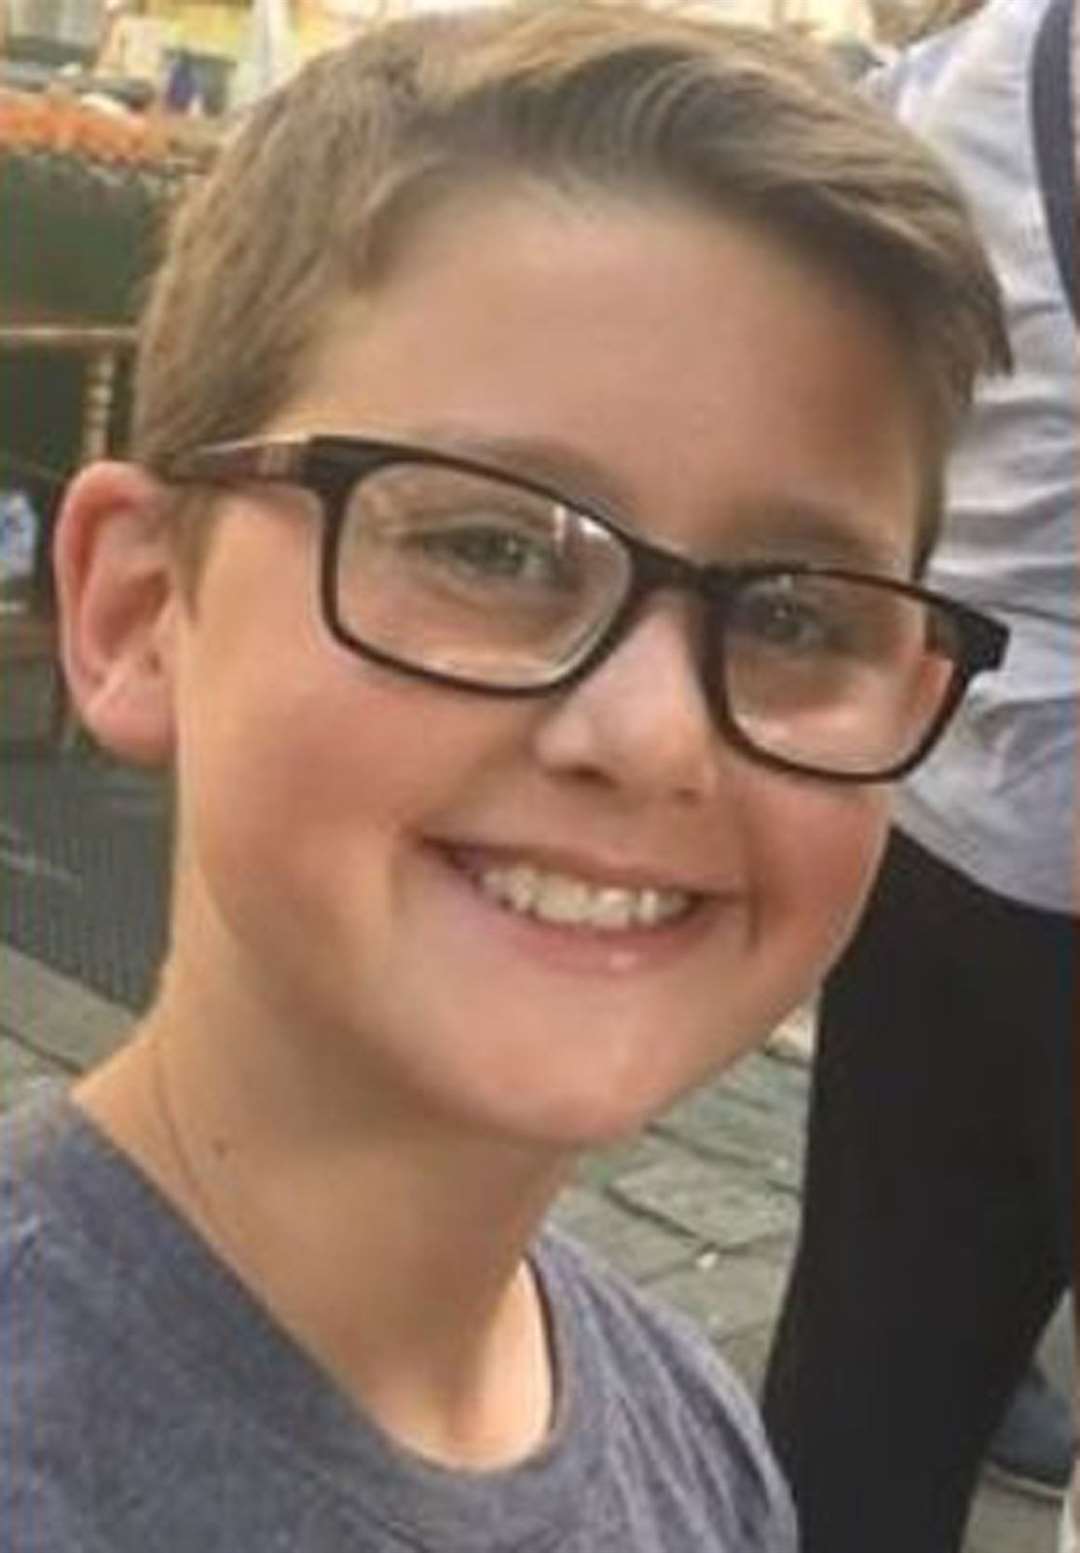 Harley Watson, 12, was killed in the hit and run outside an Essex school (Essex Police/PA)